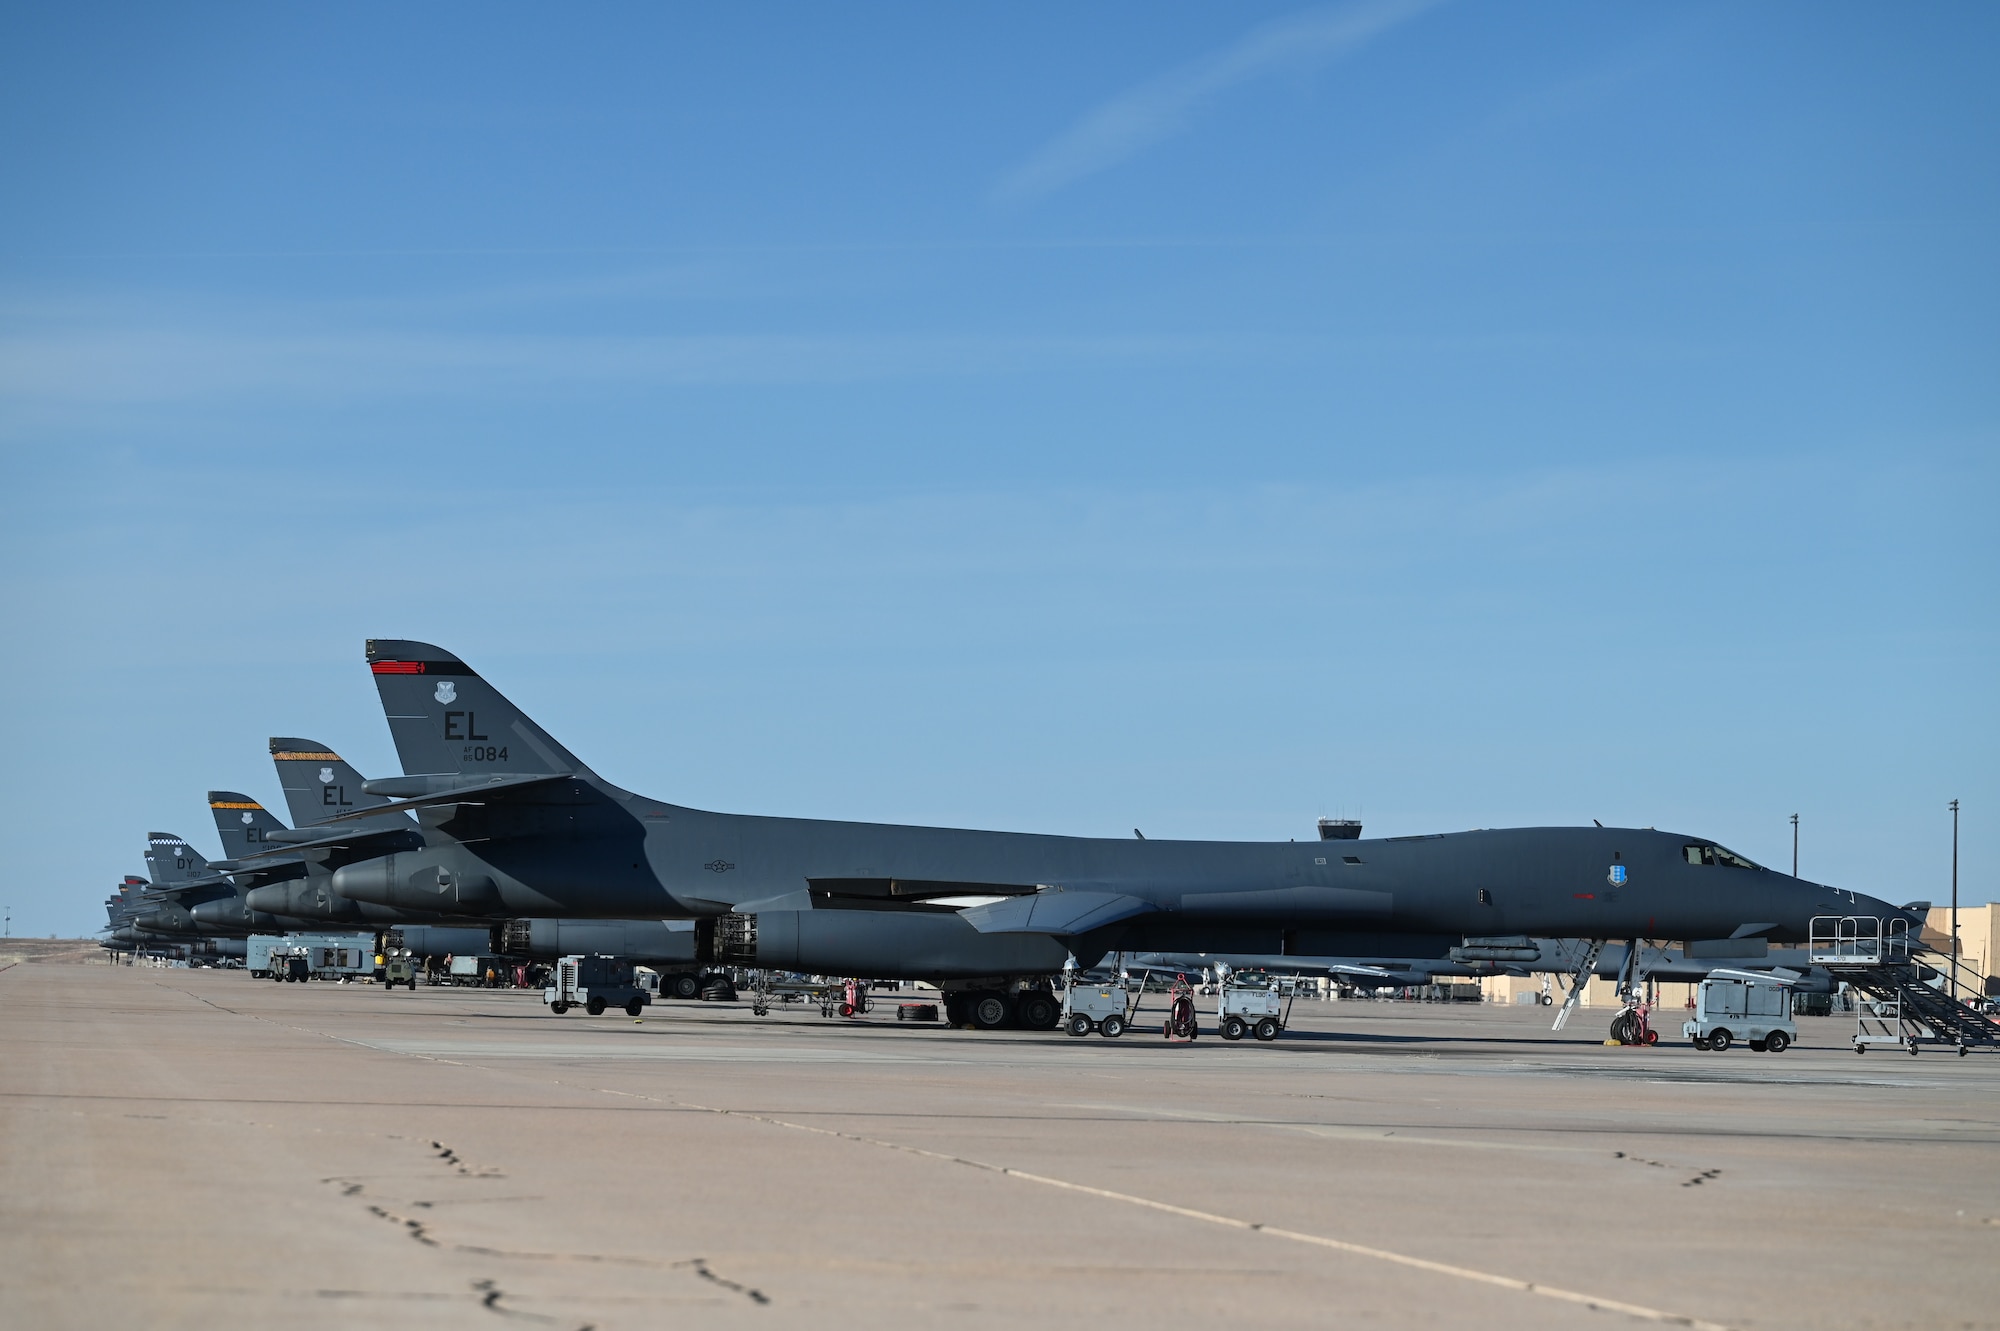 B-1B Lancers from Dyess Air Force Base and Ellsworth AFB, South Dakota, are positioned on the flightline at Dyess AFB, Texas, Feb. 1, 2024. Ellsworth Air Force Base B-1Bs recently launched from Dyess Air Force Base to support U.S. Central Command priorities, validating the United States Air Force capability to provide precision, long-range strike anytime, anywhere. (U.S. Air Force photo by Staff Sgt. Holly Cook)